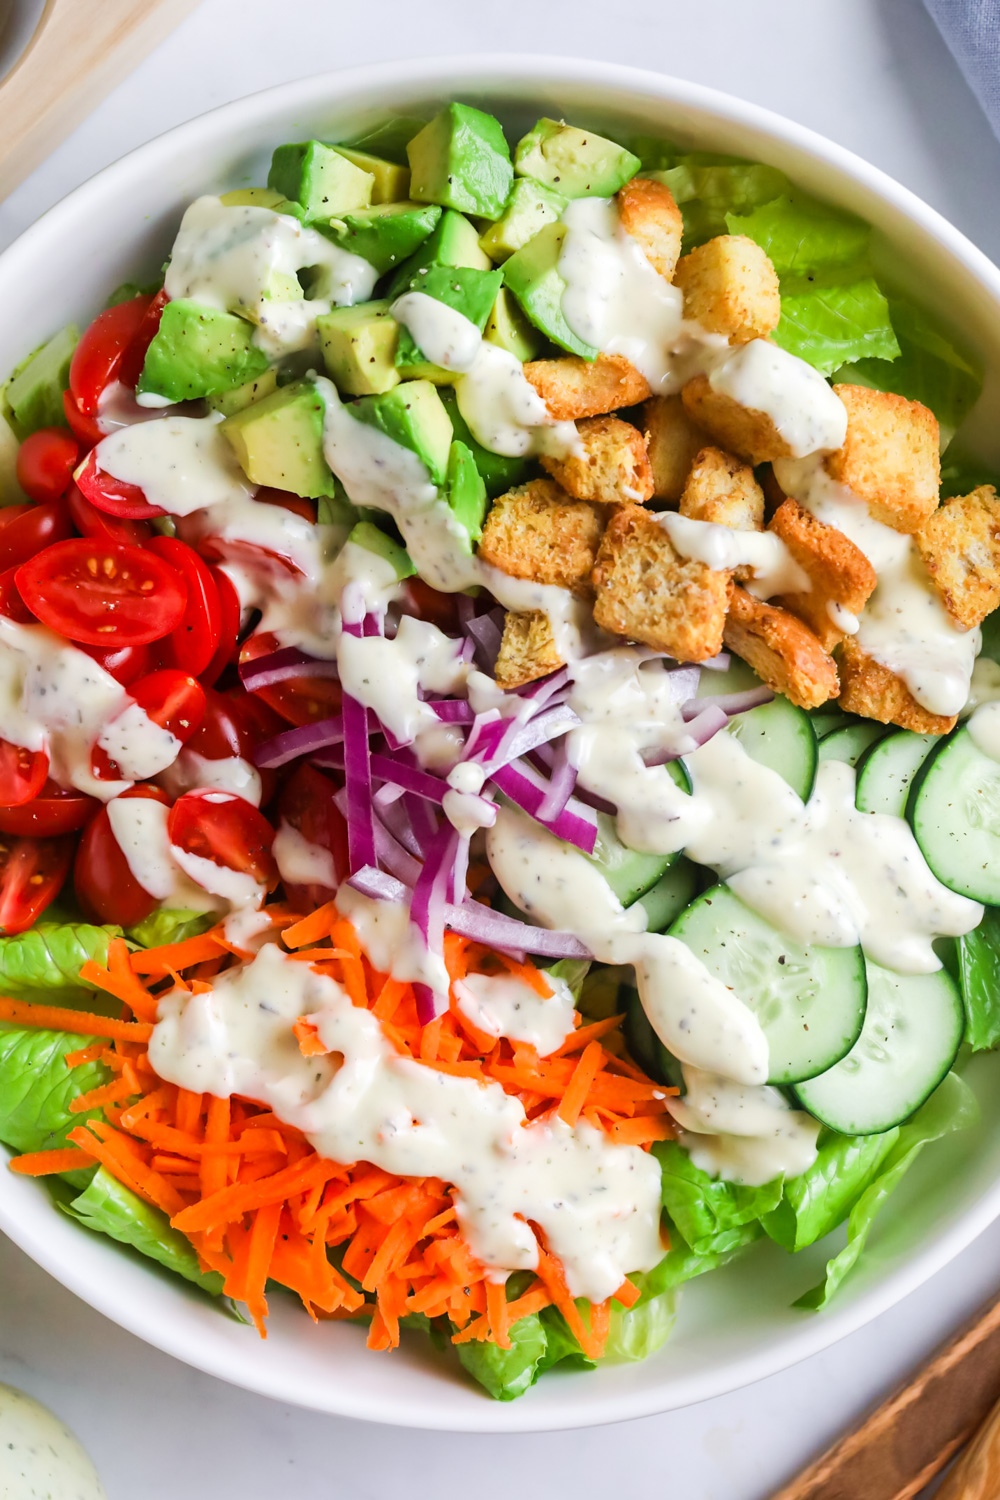 Side salad with creamy dressing. 